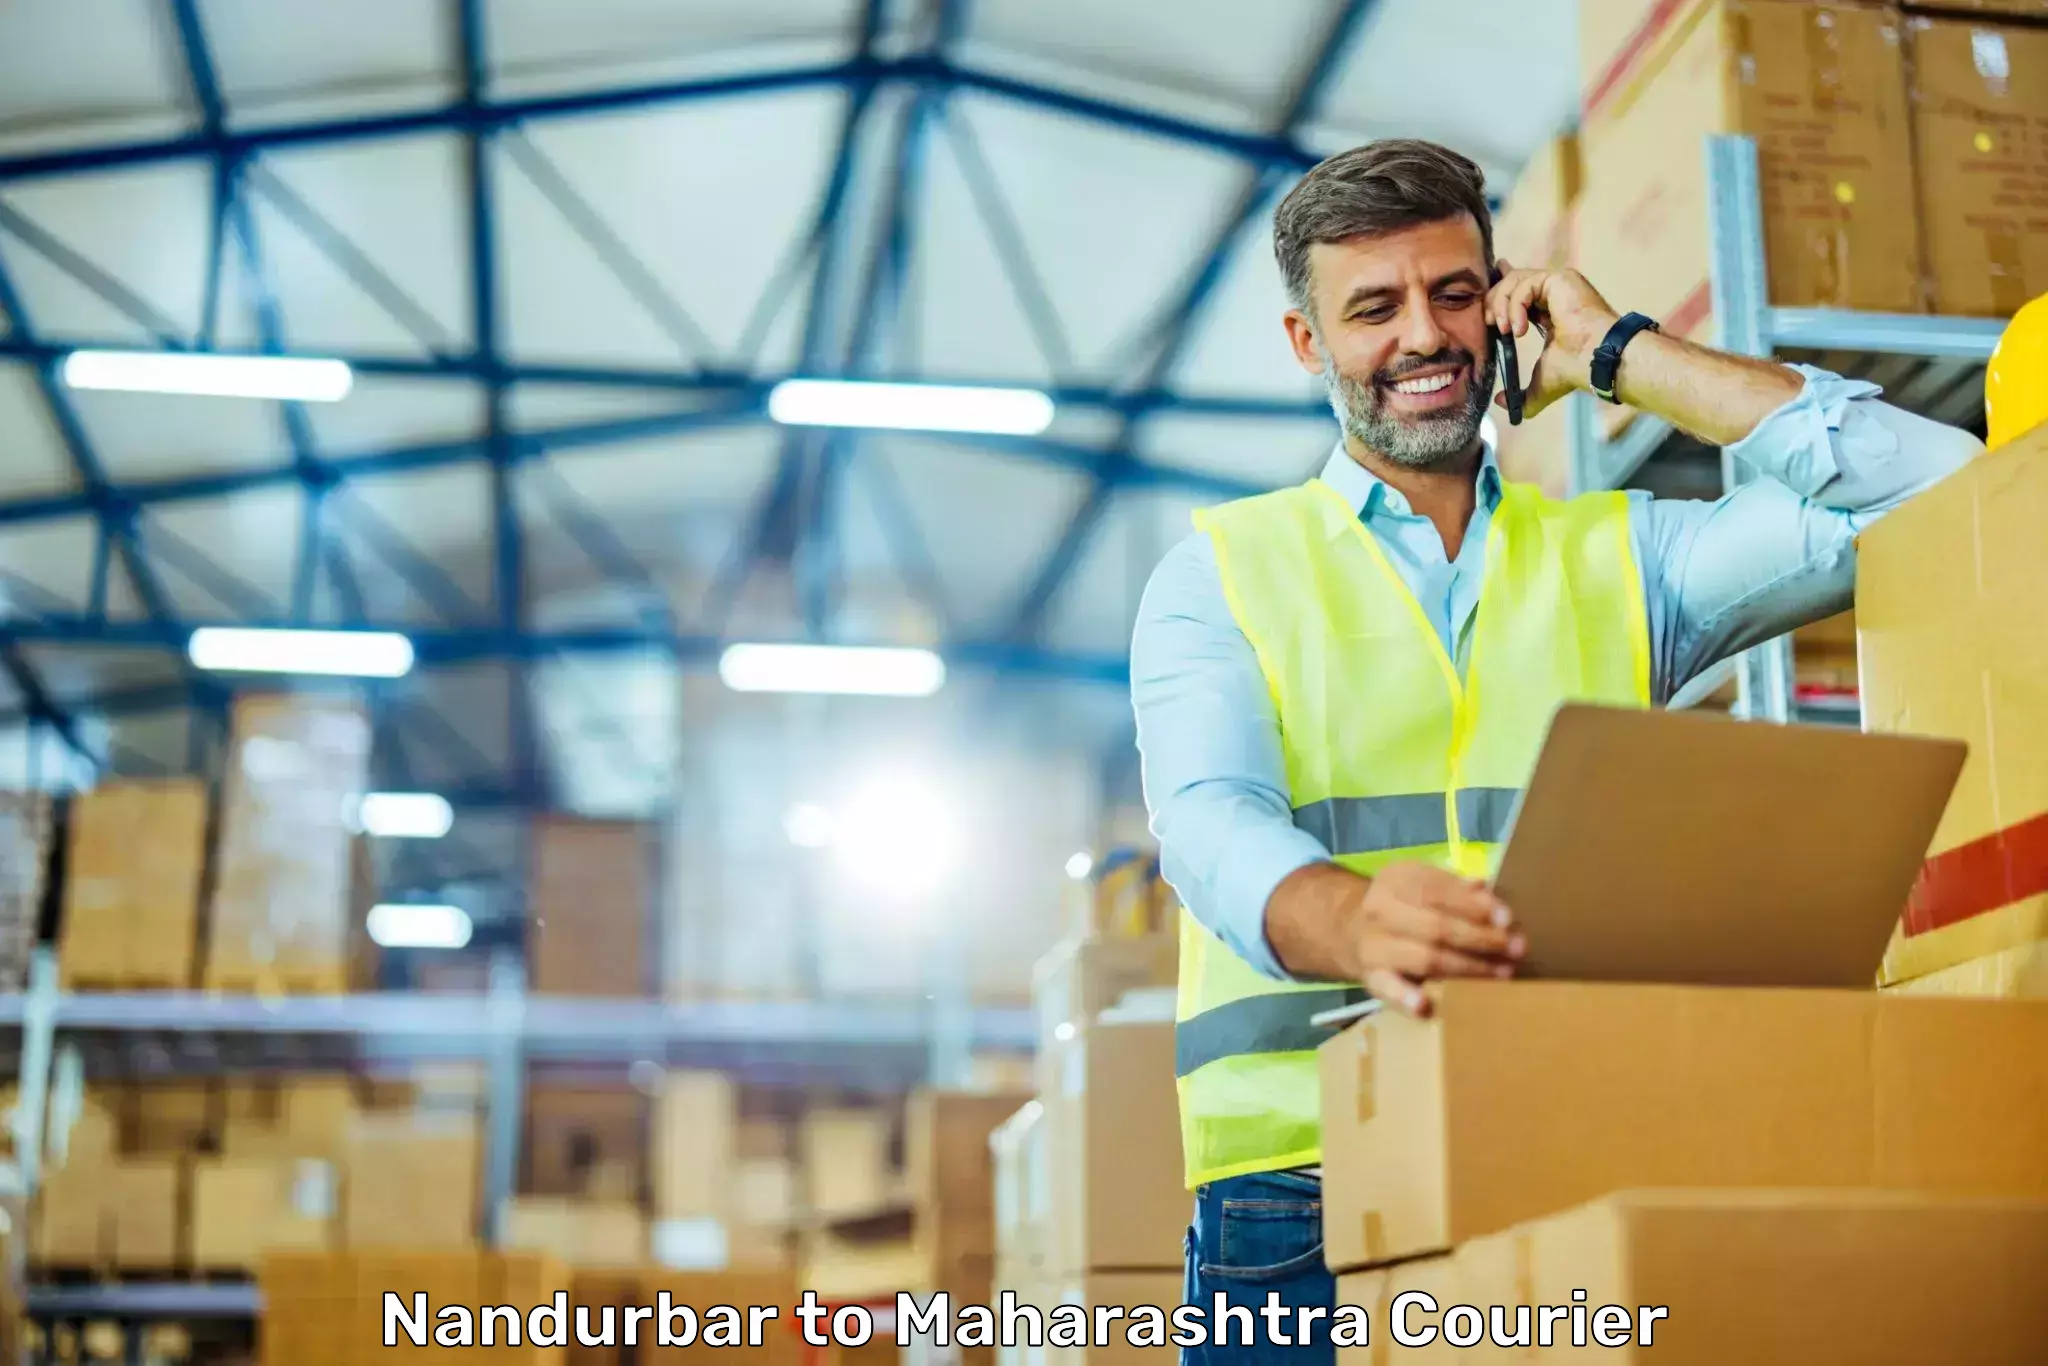 Express delivery solutions Nandurbar to Dadar